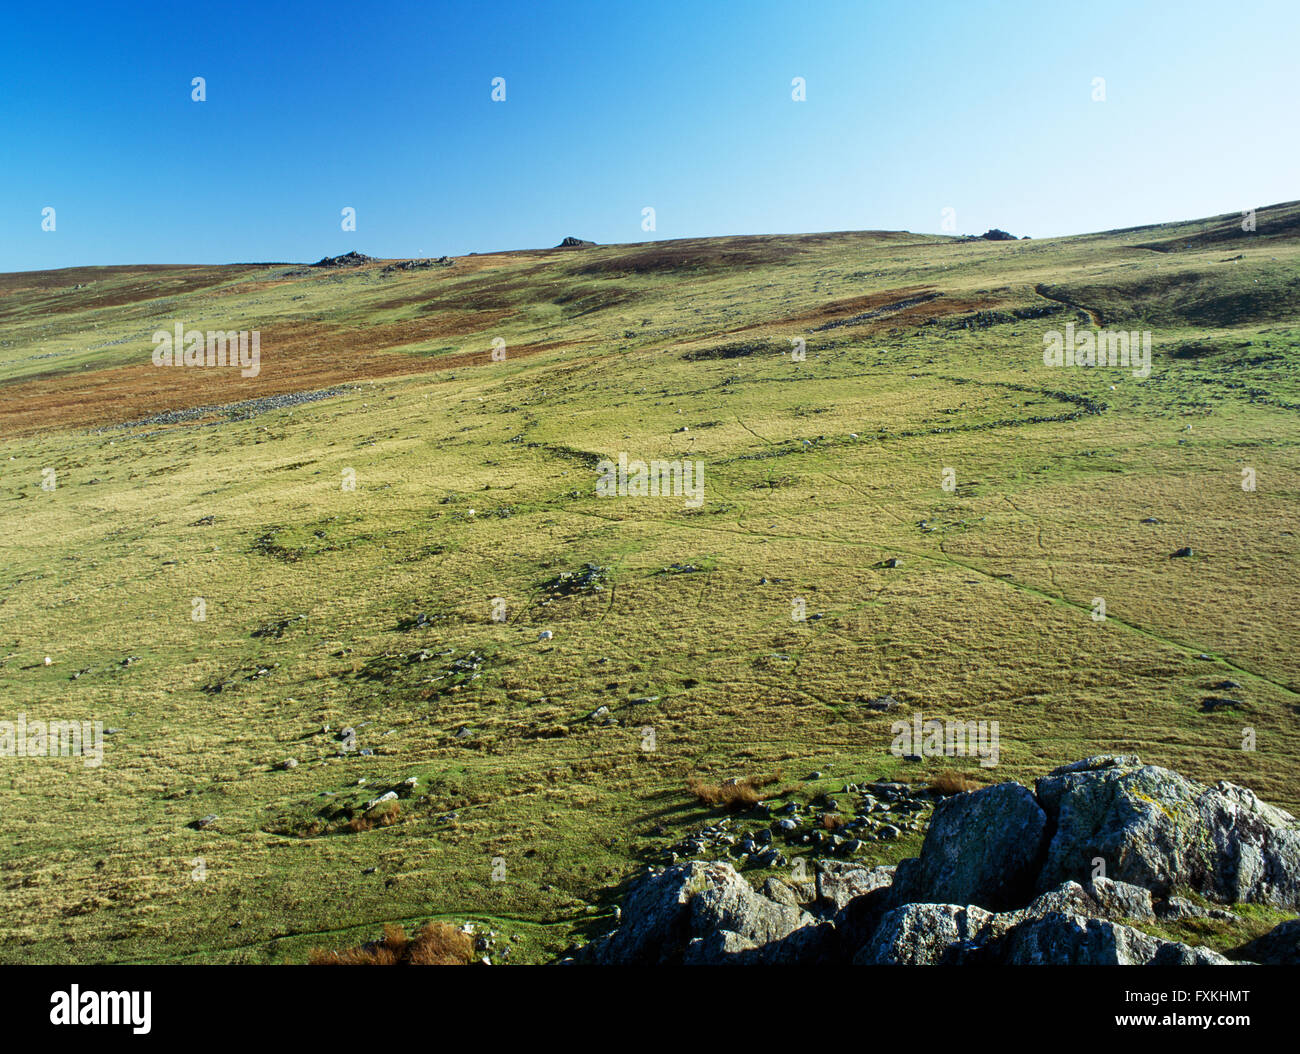 An undefended Iron Age agricultural settlement SE of the small hillfort on Carn Alw (Carnalw) outcrop on Mynydd Preseli, Pembrokeshire. Stock Photo